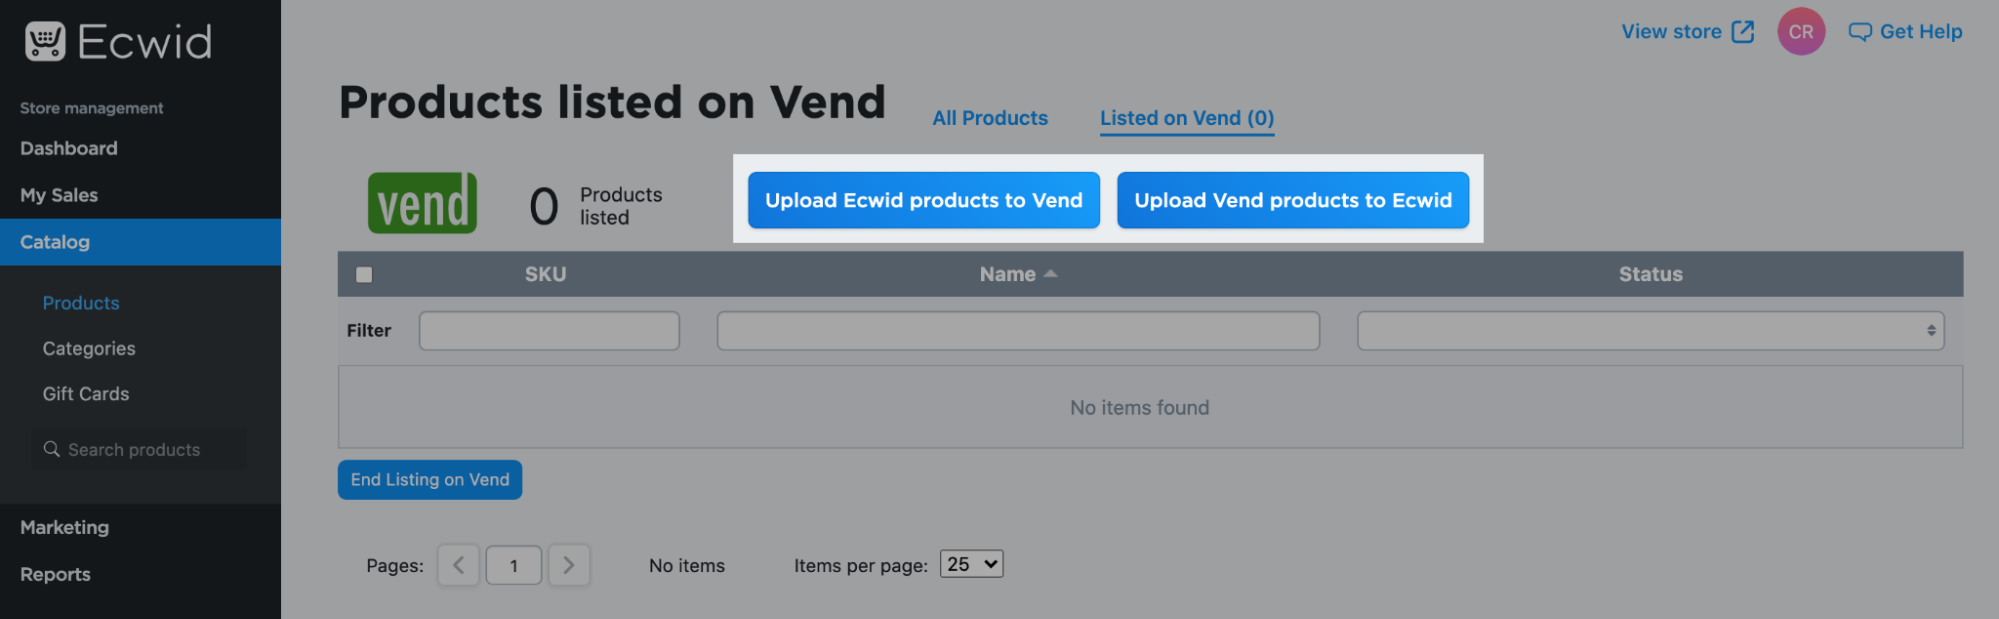 Syncing_products_and_orders_between_Ecwid_and_Vend__6_.png